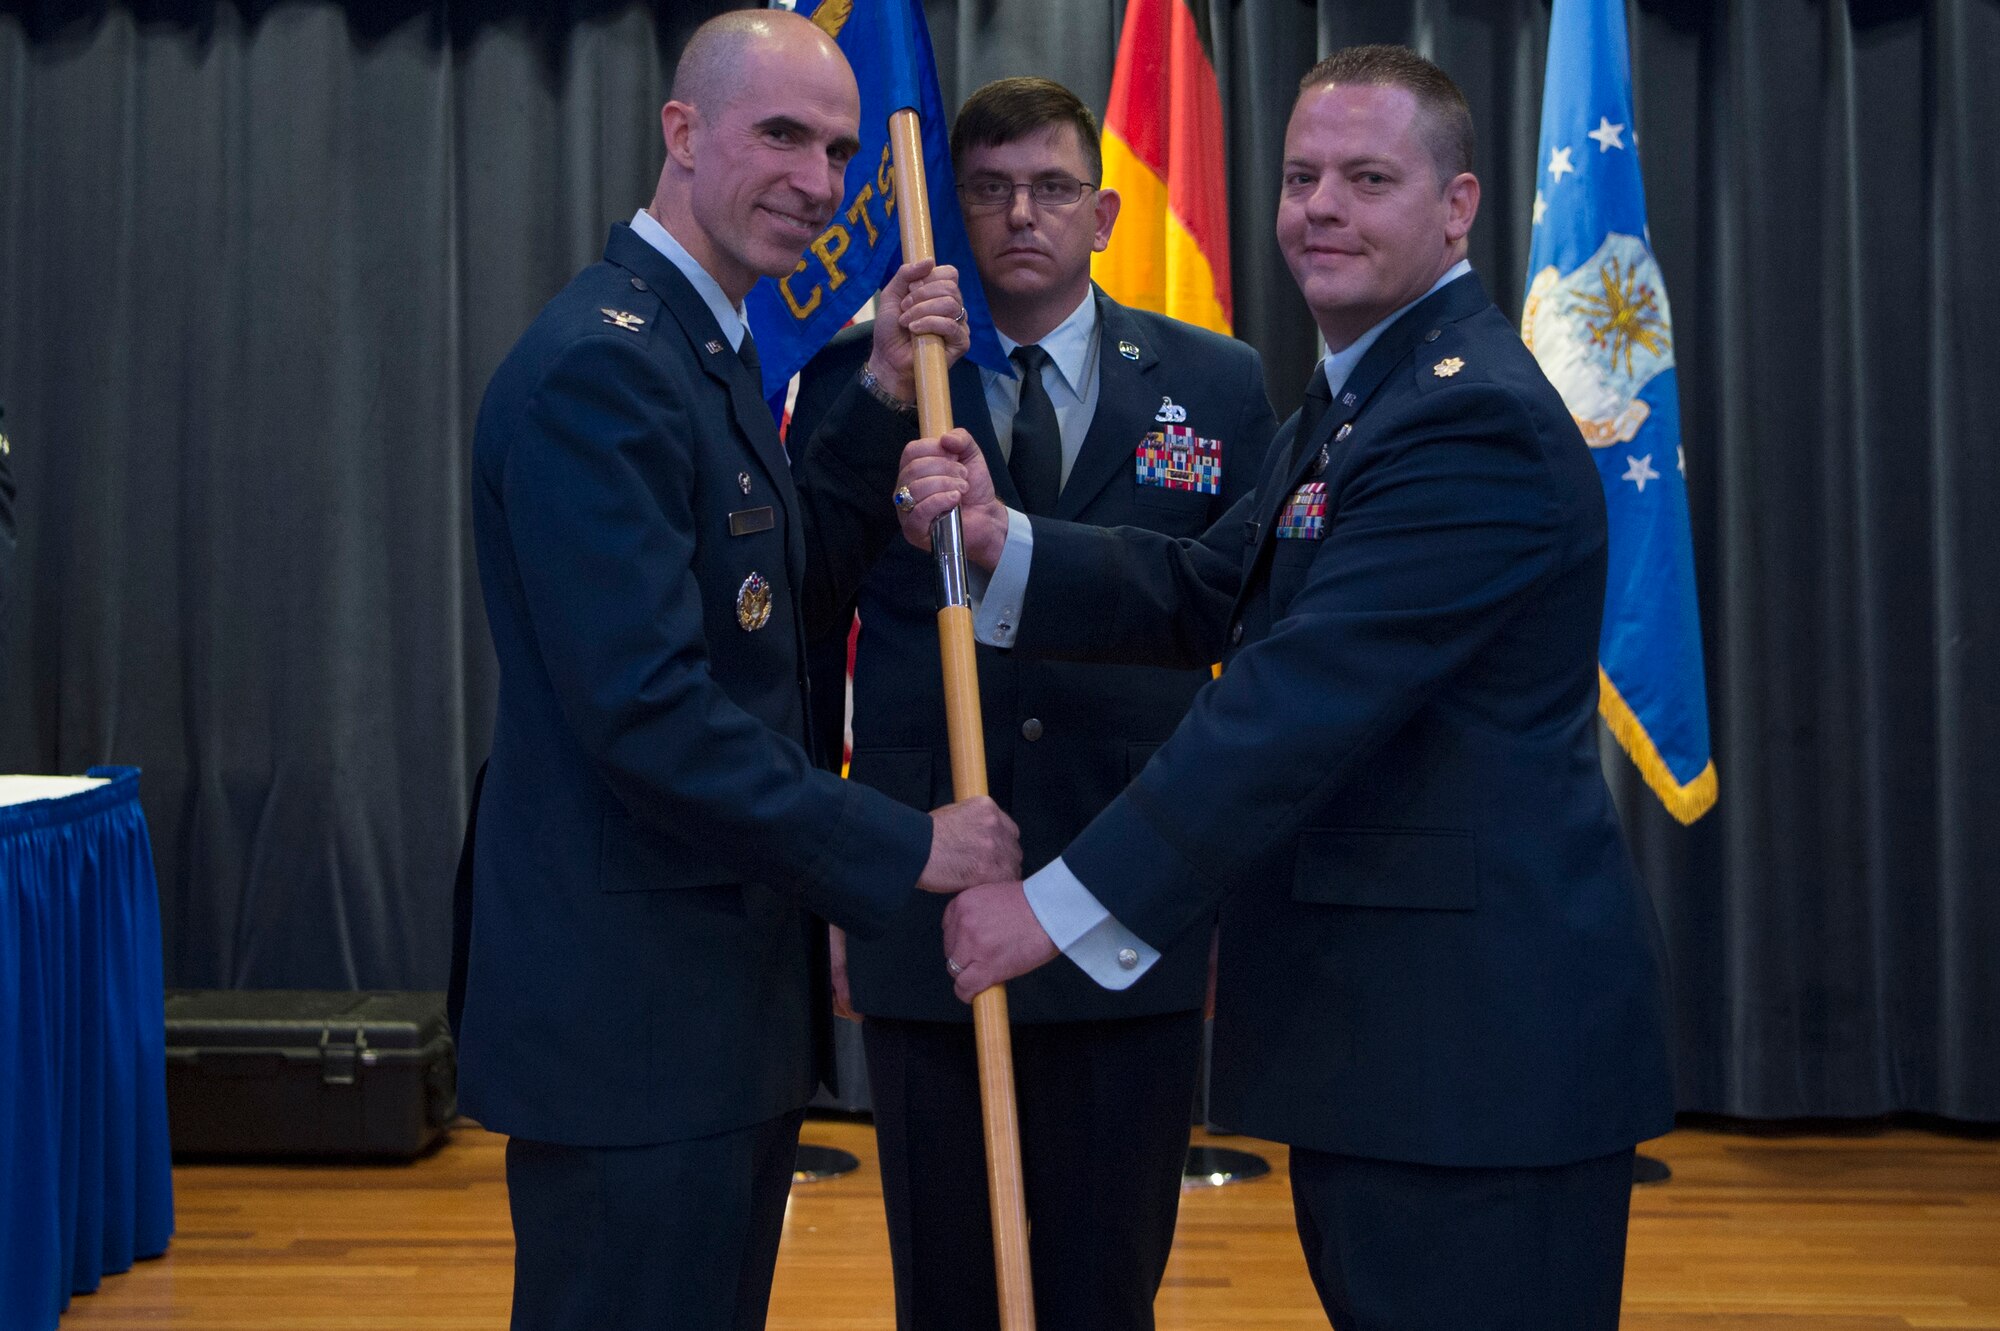 U.S. Air Force Col. Jason Bailey, 52nd Fighter Wing commander, left, gives the ceremonial guidon to U.S. Air Force Maj. Shawn Schulz, incoming 52nd Comptroller Squadron commander, during the 52nd CPTS change of command ceremony on Spangdahlem Air Base, Germany, June 18, 2018. (U.S. Air Force photo by Airman 1st Class Jovante Johnson)